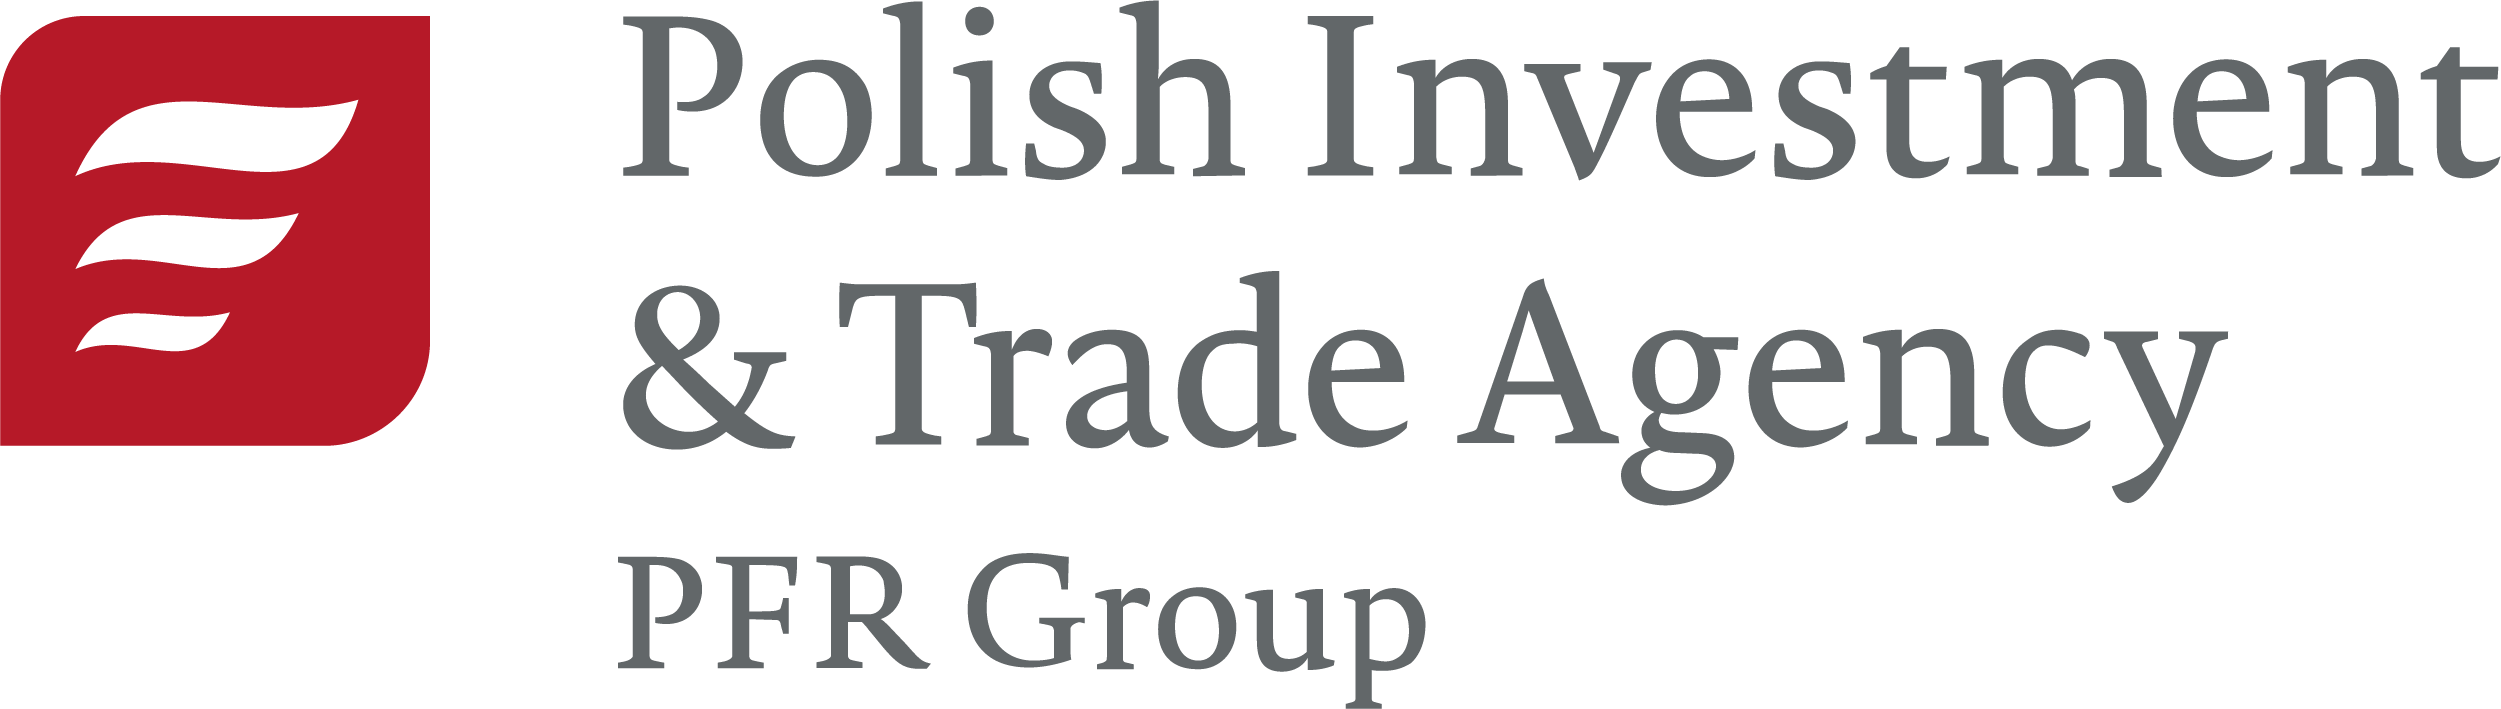 POLISH TRADE & INVESTMENT AGENCY